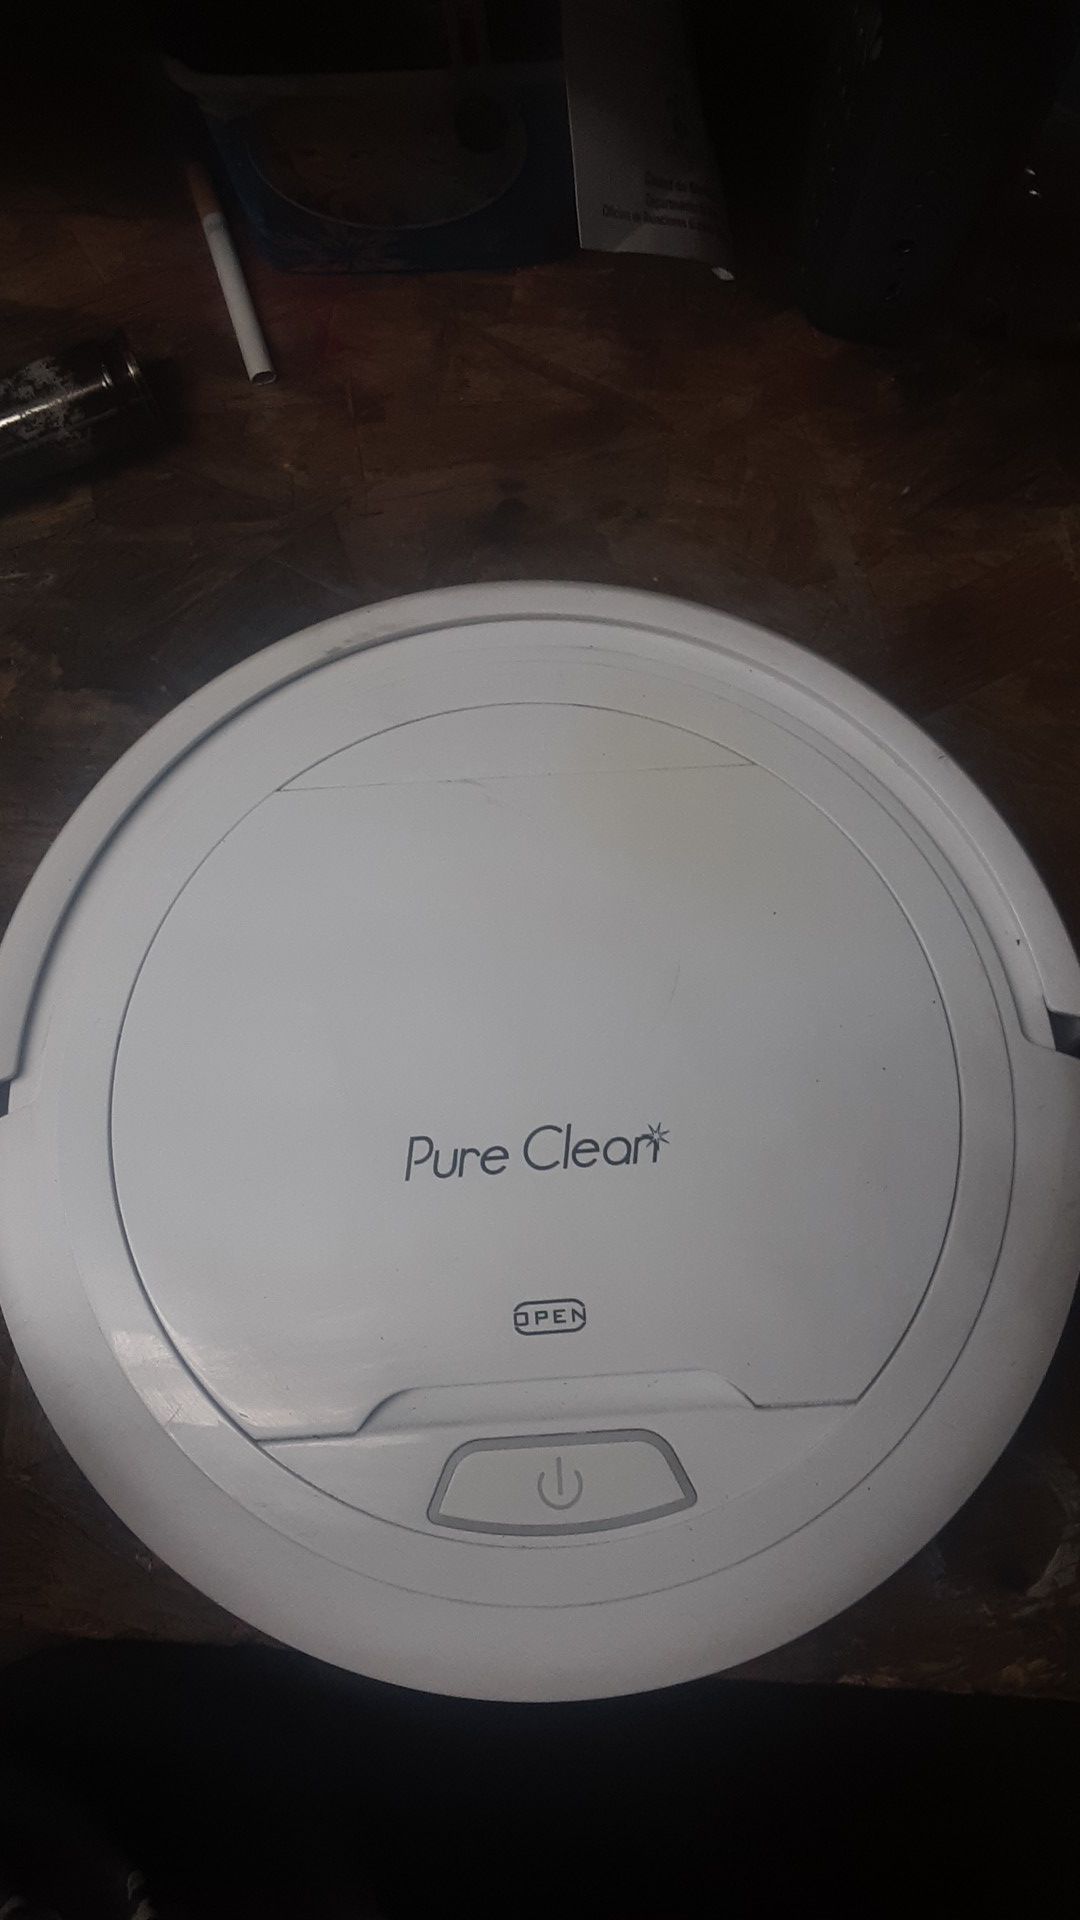 Pure Clean vacuuming robot